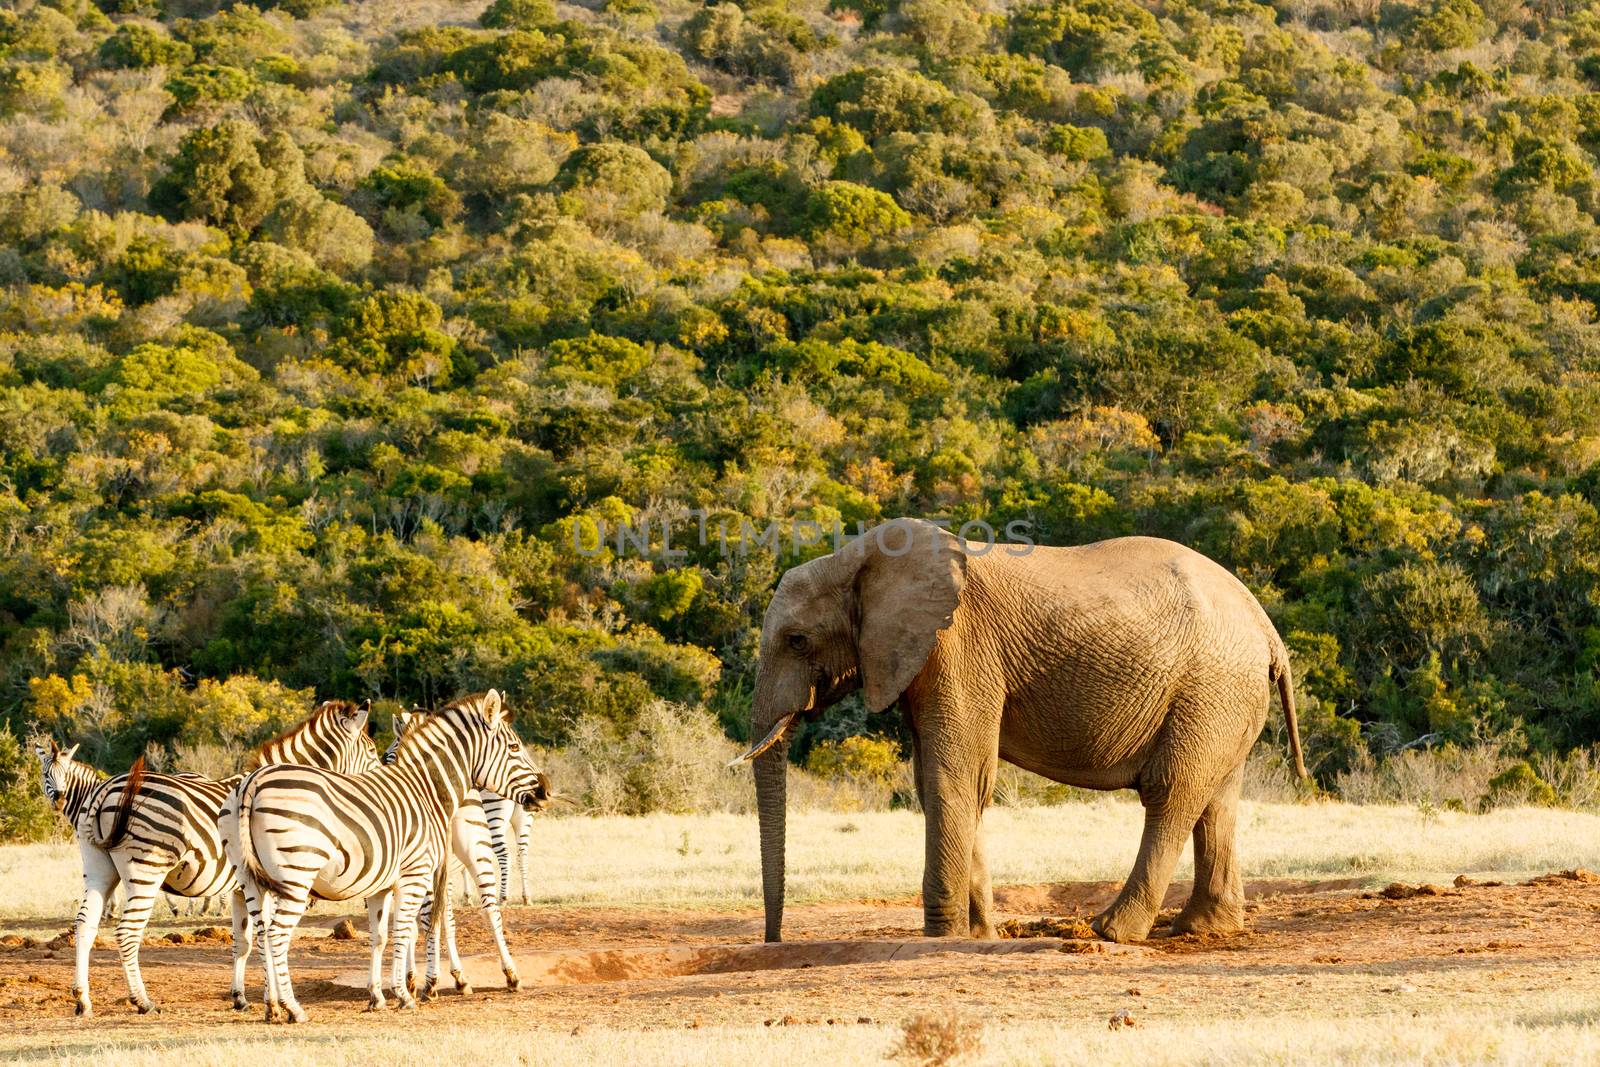 Elephant having a chat with Zebra